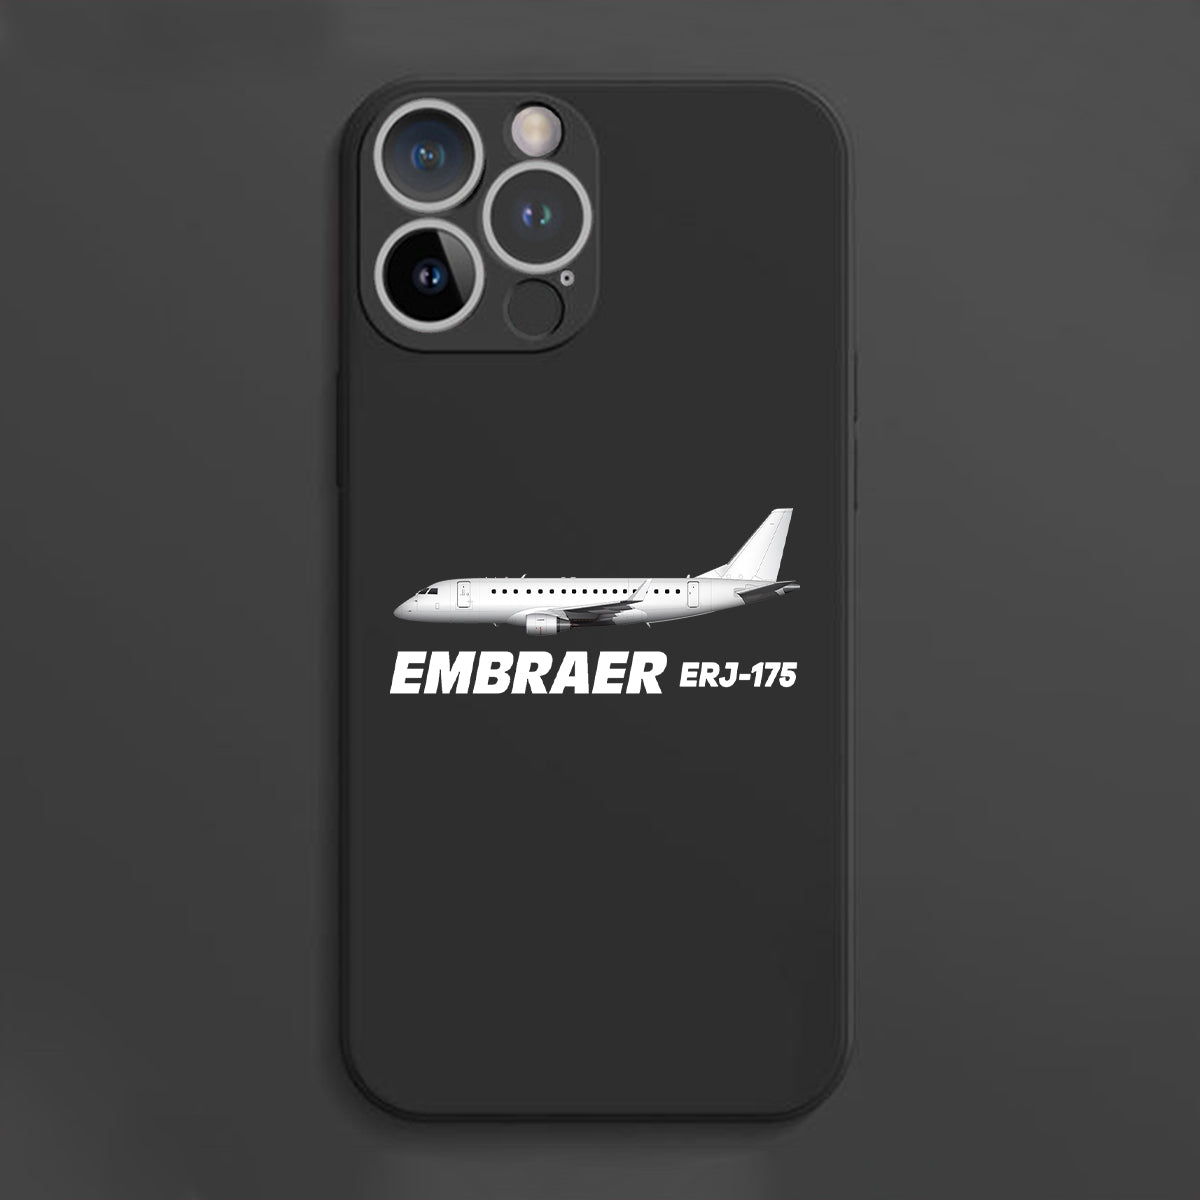 The Embraer ERJ-175 Designed Soft Silicone iPhone Cases